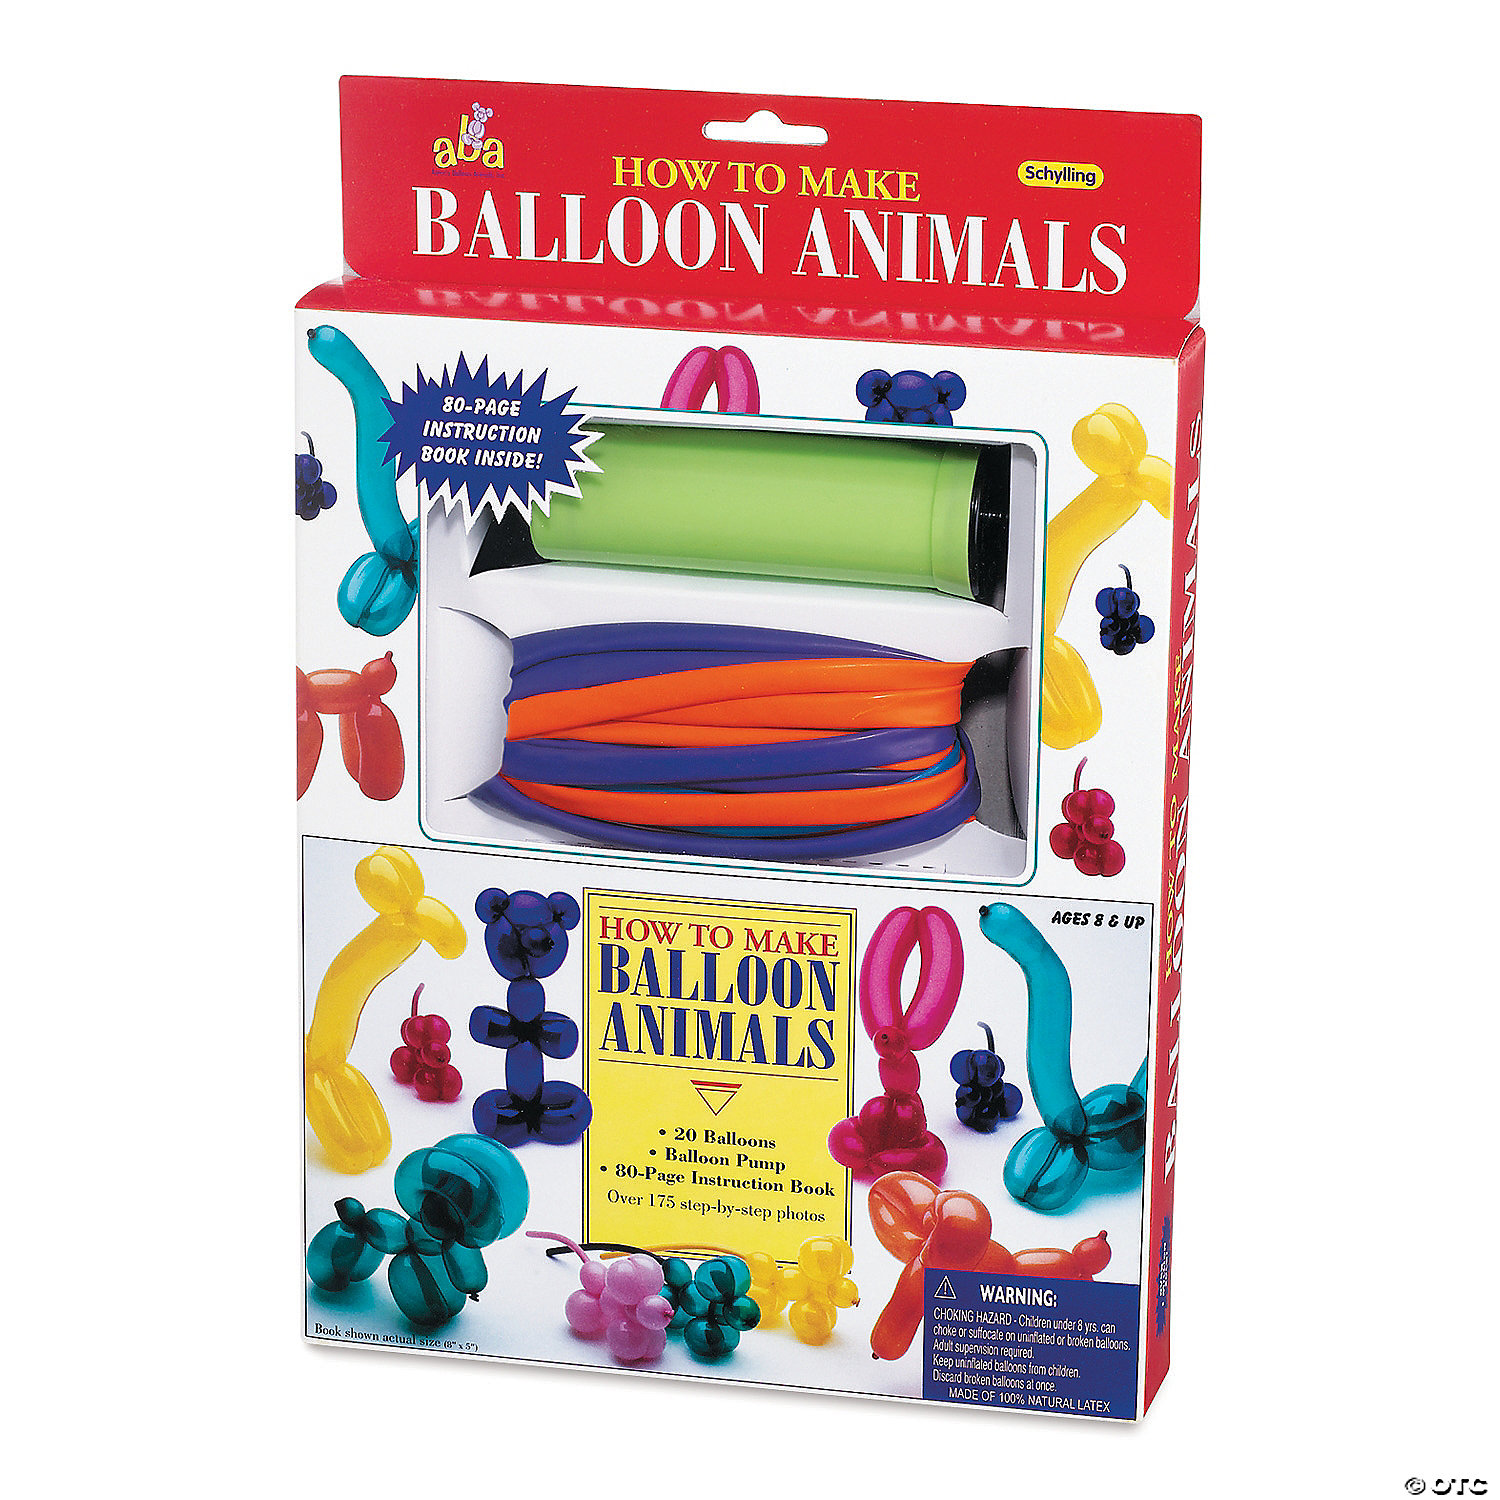 How to Make Balloon Animals Kit - Discontinued